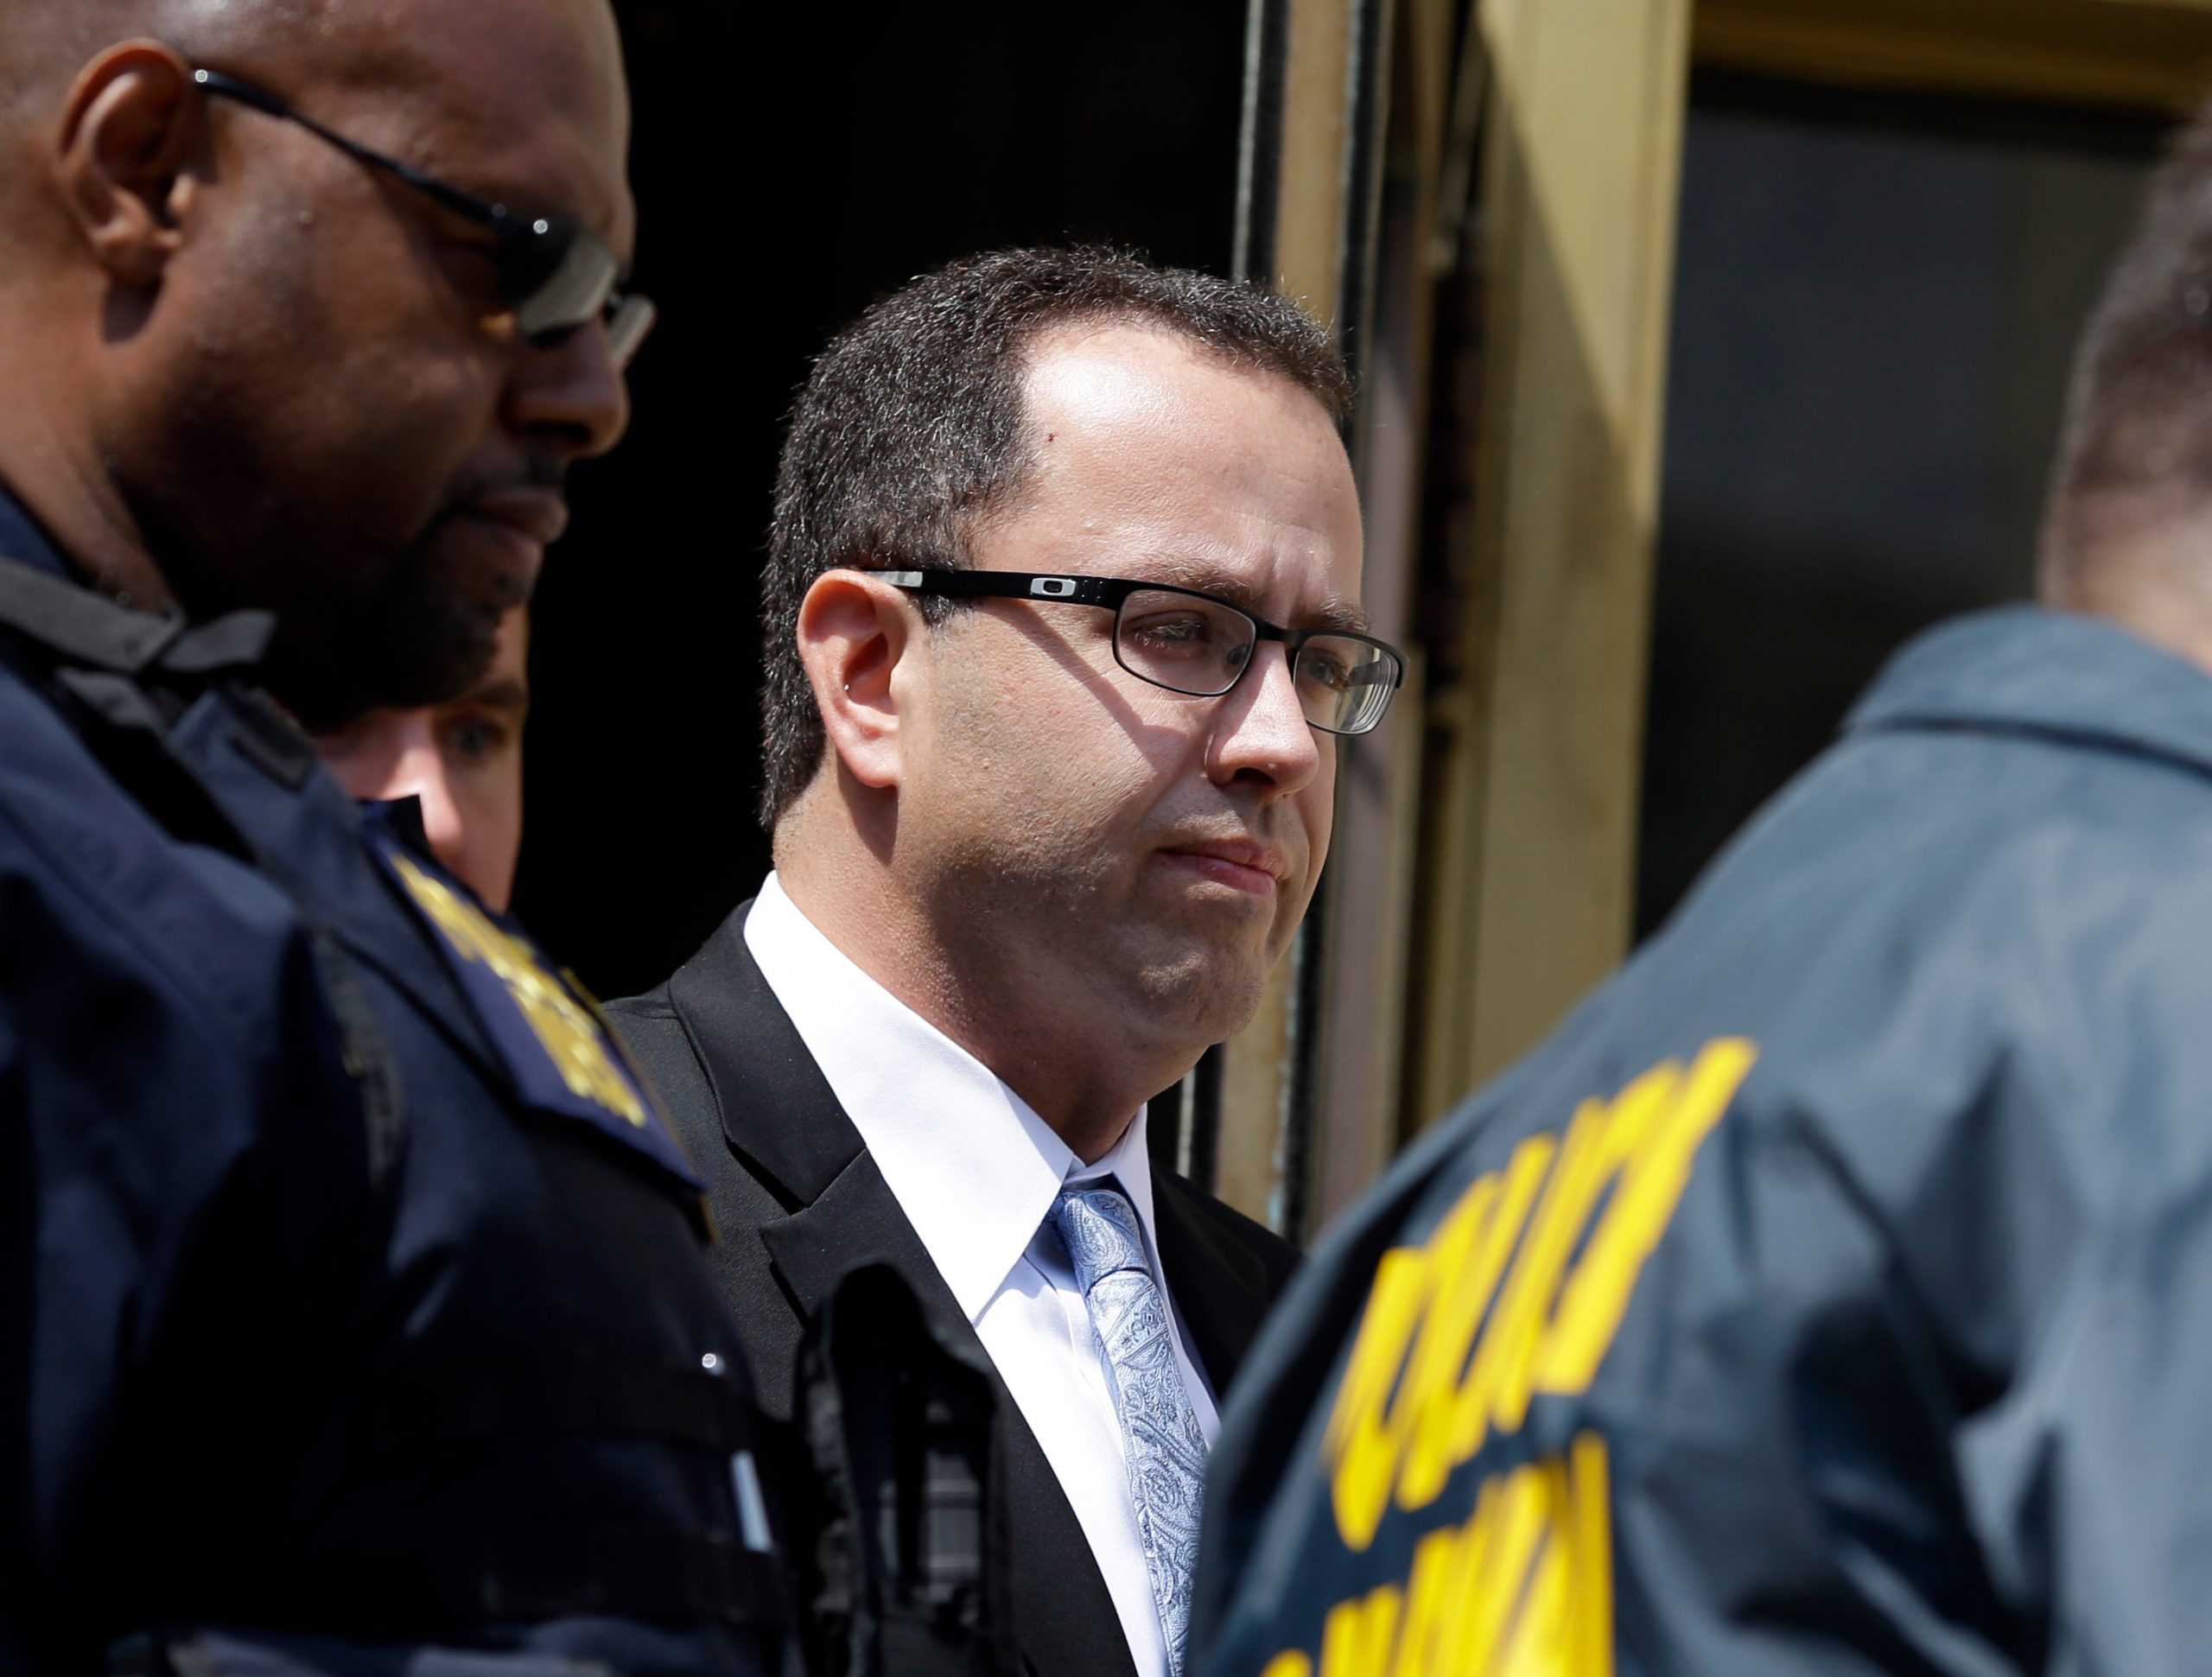 <p>For 15 years, Jared Fogle was a Subway spokesman, touting the fact that he’d lost more than 200 pounds by eating its sandwiches. But all that changed in 2015, when he was found guilty of child pornography and paying for sex with minors. Cue the "Footlong" jokes. It wasn’t the best look for Subway, who immediately dropped Fogle from its payroll when the charges came out. Check out these <a href="https://www.rd.com/list/times-employees-exposed-restaurants-dirty-secrets/">13 times employees revealed restaurants' dirty secrets</a>.</p>